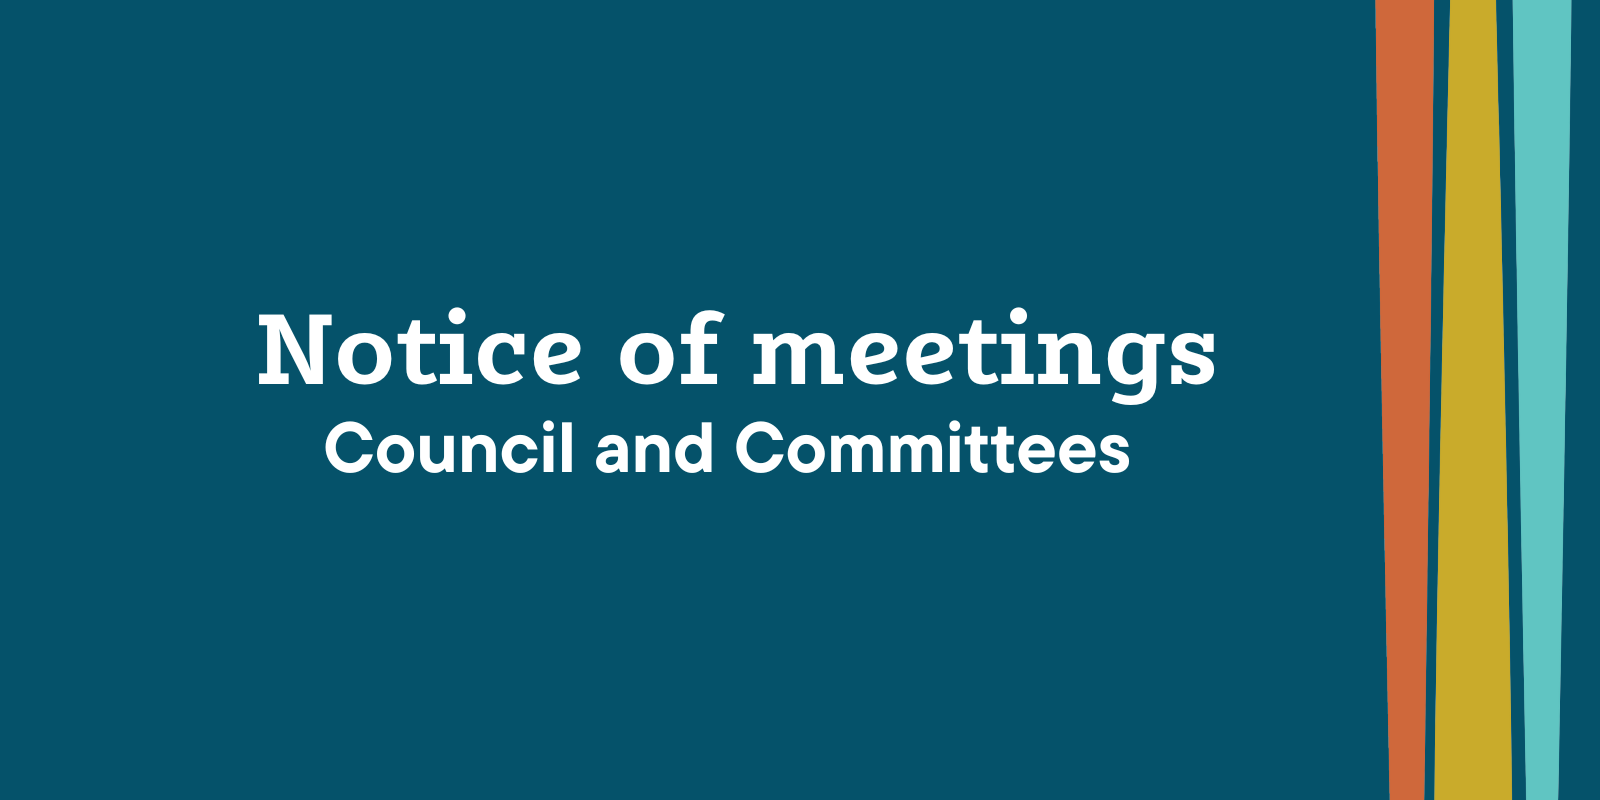 Notice of meetings - council and committees banner image